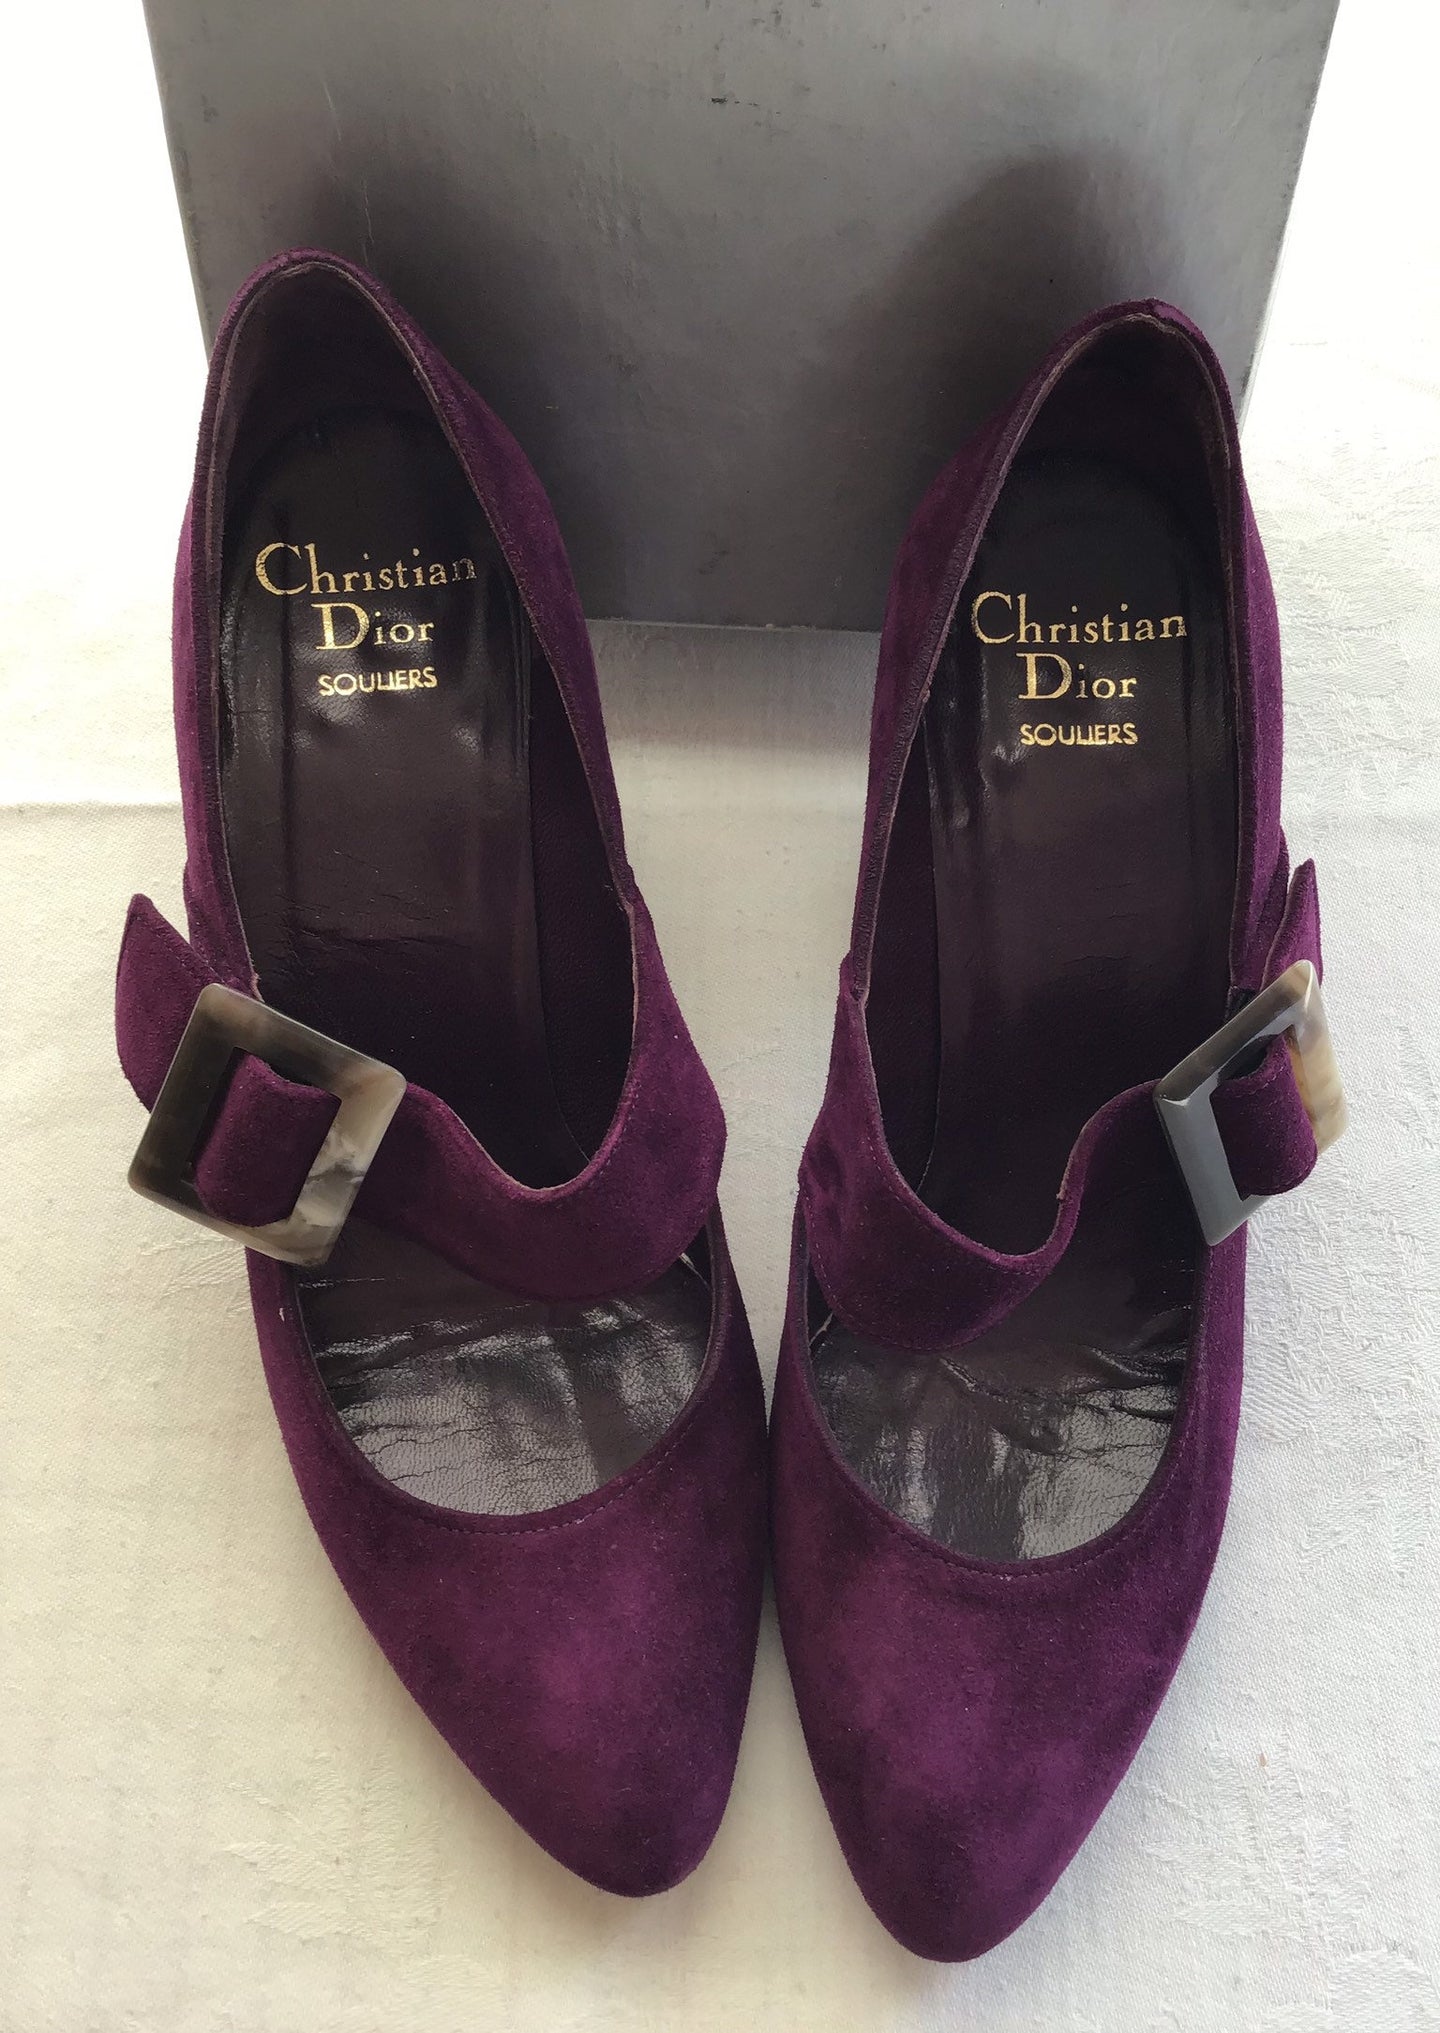 Christian Dior  Evening shoes  French  The Metropolitan Museum of Art